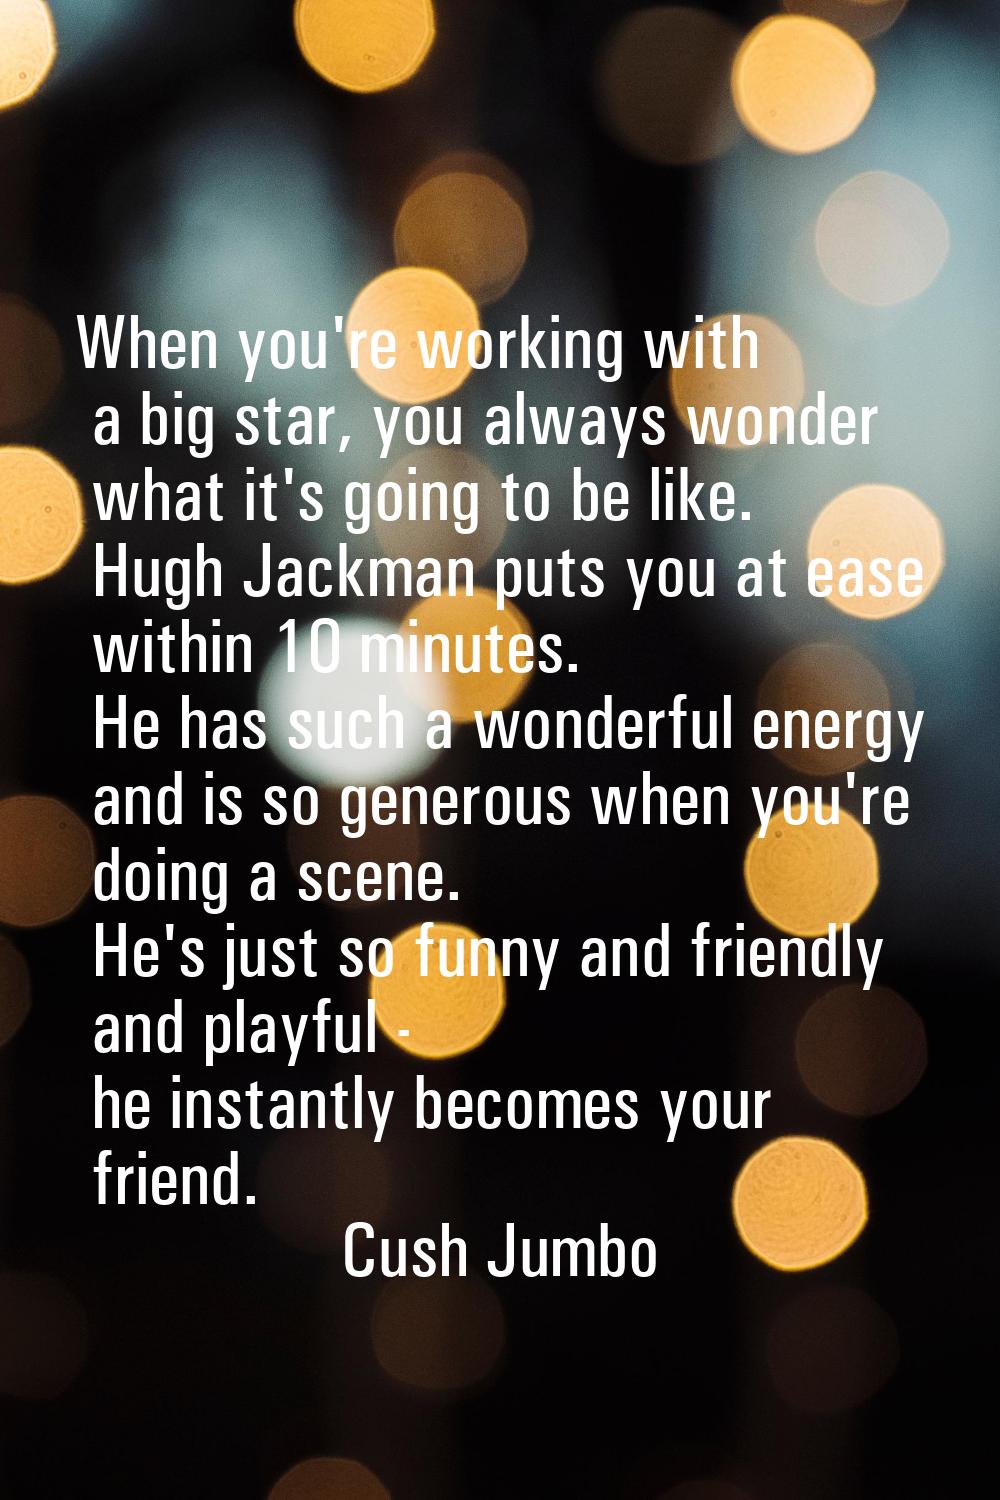 When you're working with a big star, you always wonder what it's going to be like. Hugh Jackman put